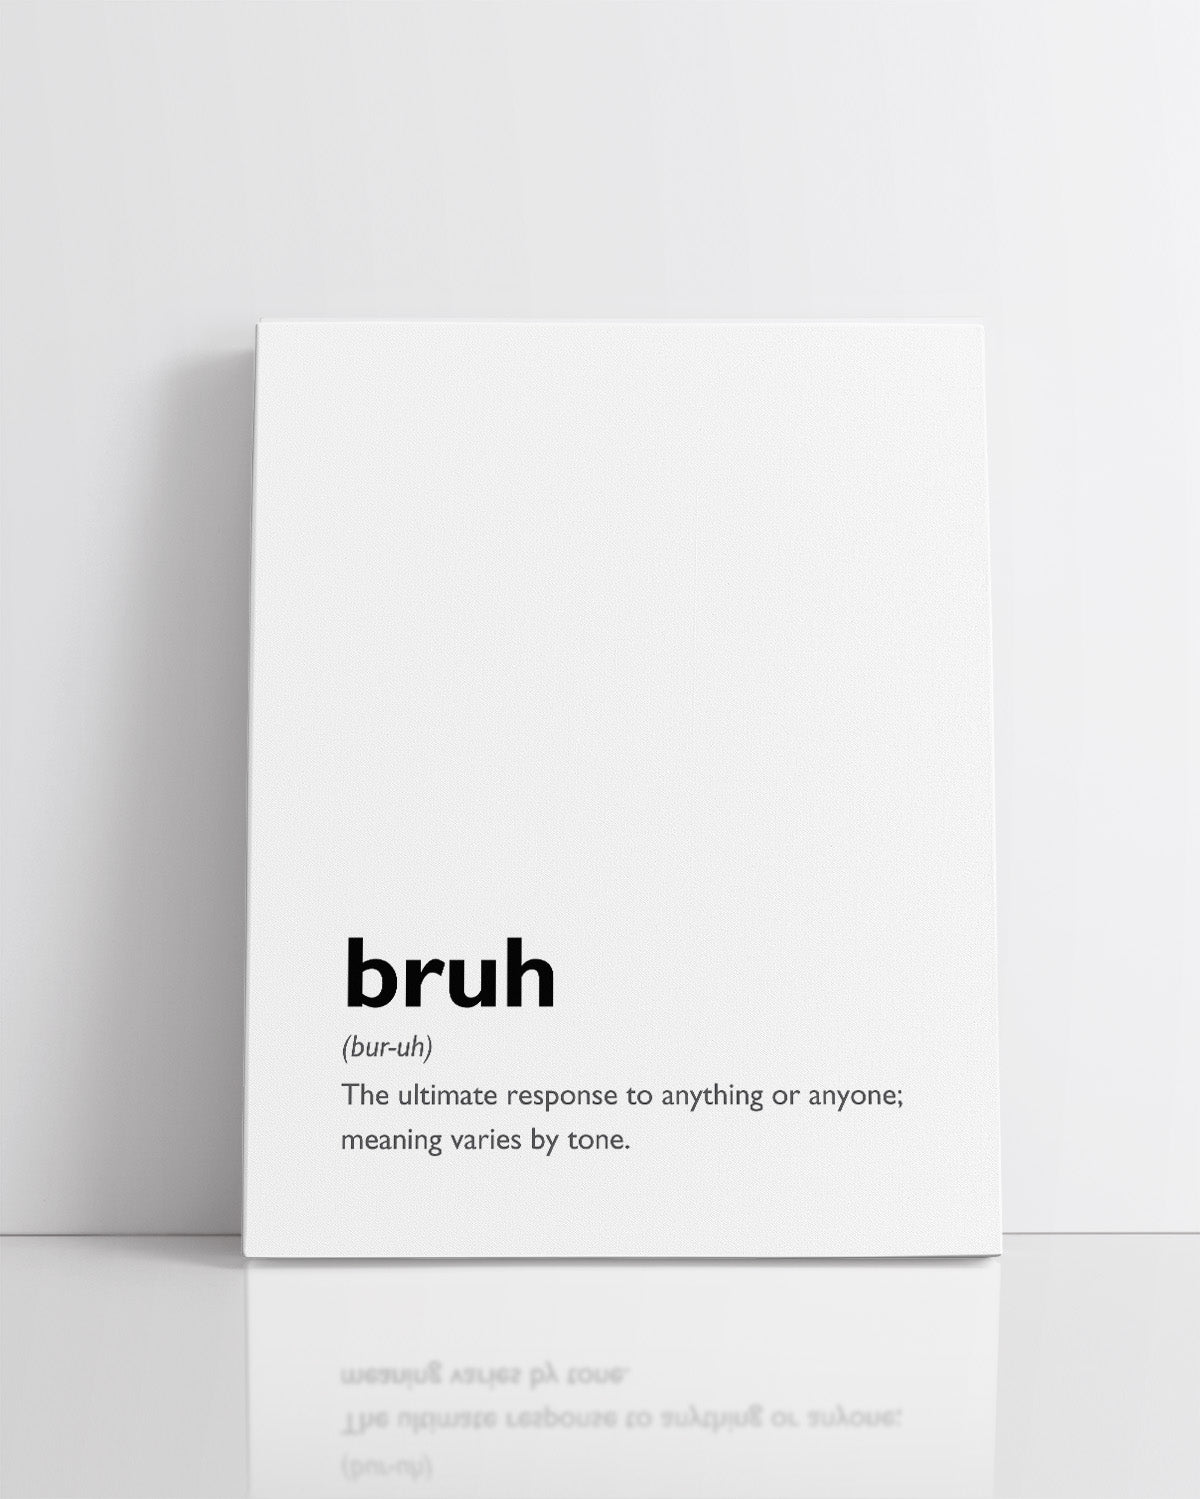 Bruh Definition Wall Art - Funny Gift for Boys, Teens, Men - Modern Typography Wall Decor - Cubicle, Office Wall Decor - Dorm Room Wall Art - Boys Bedroom Decorations